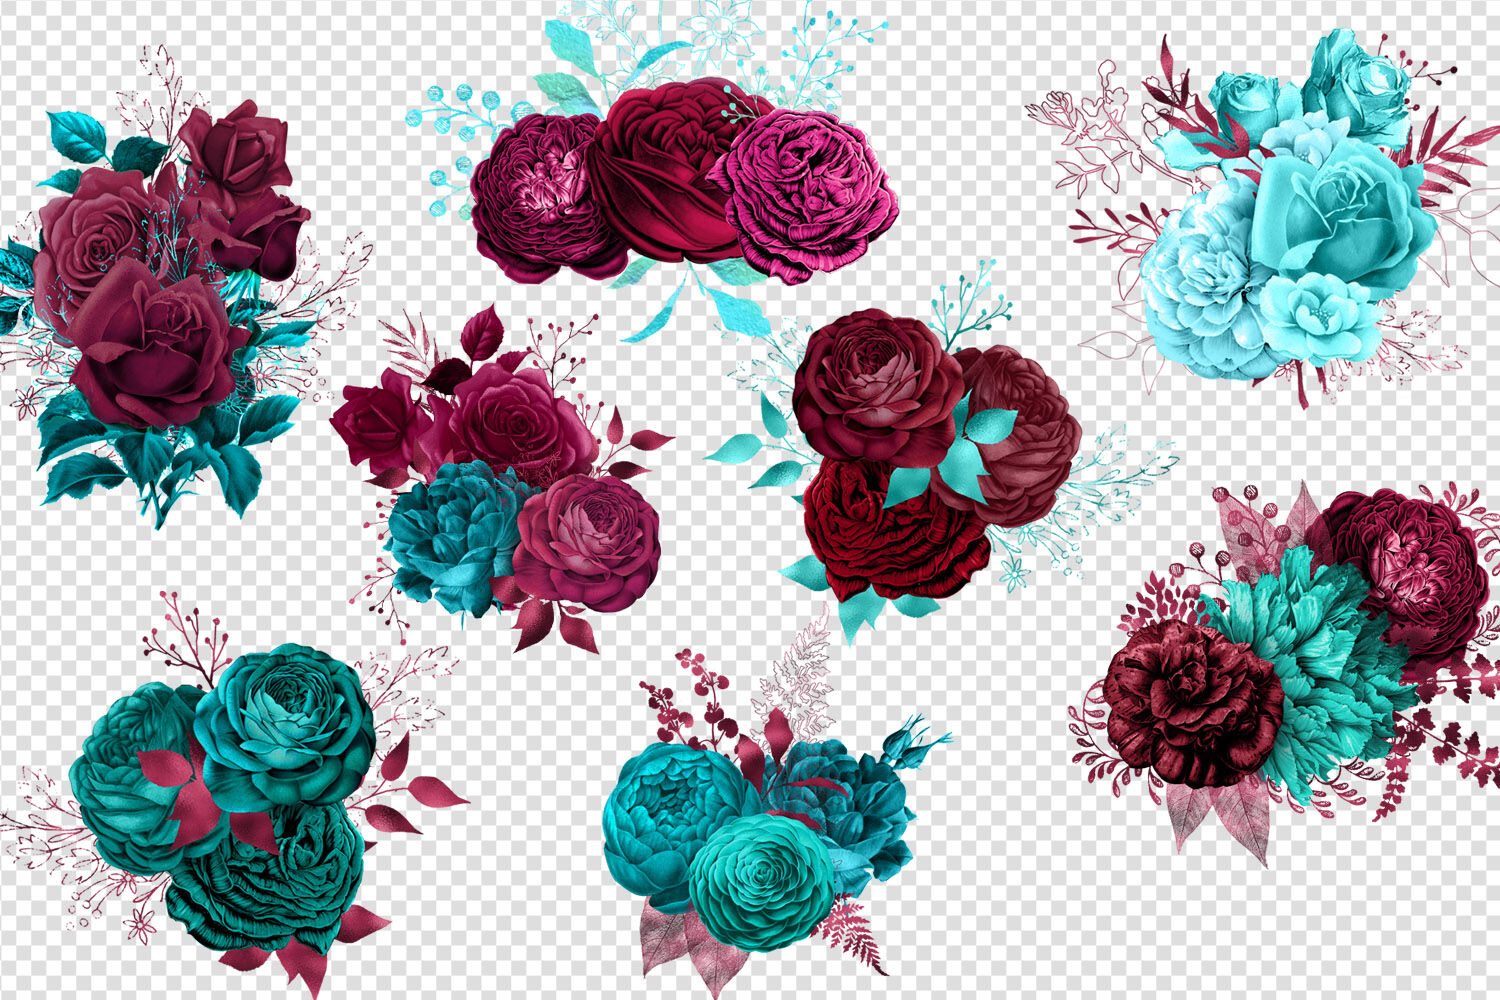 Turquoise and Burgundy Floral Bouquets By Digital Curio